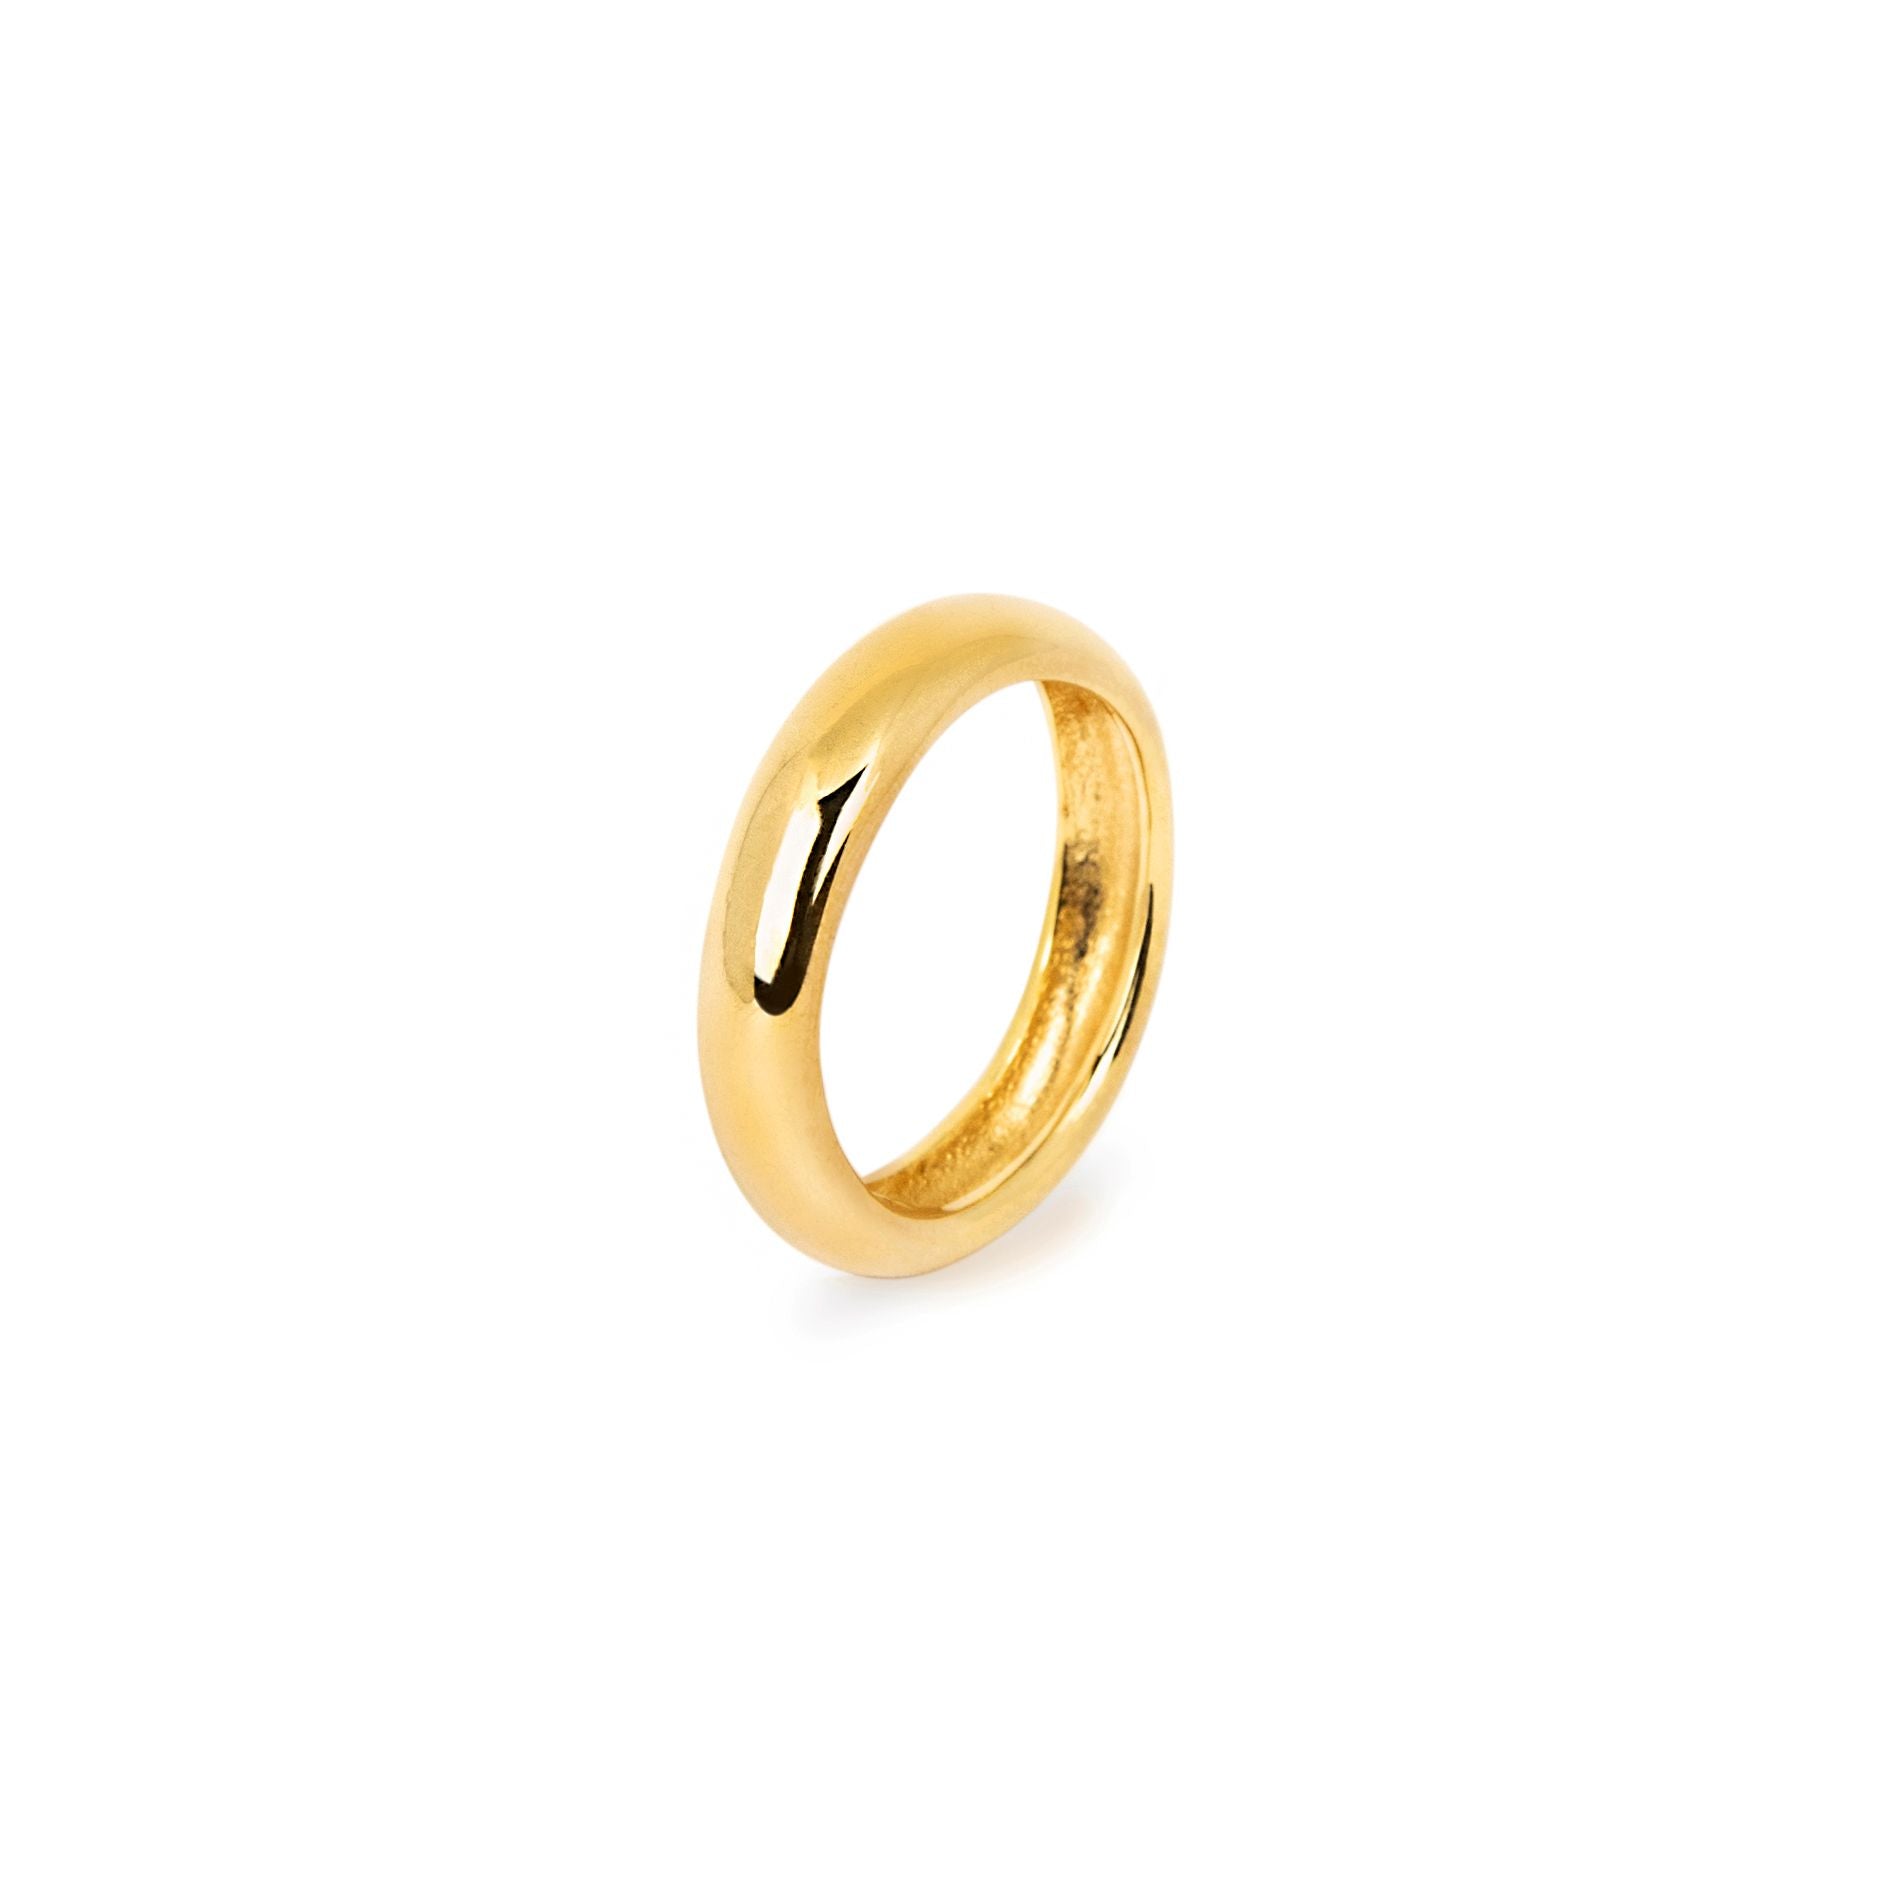 TUBE RING IN 18K YELLOW GOLD PLATED SILVER